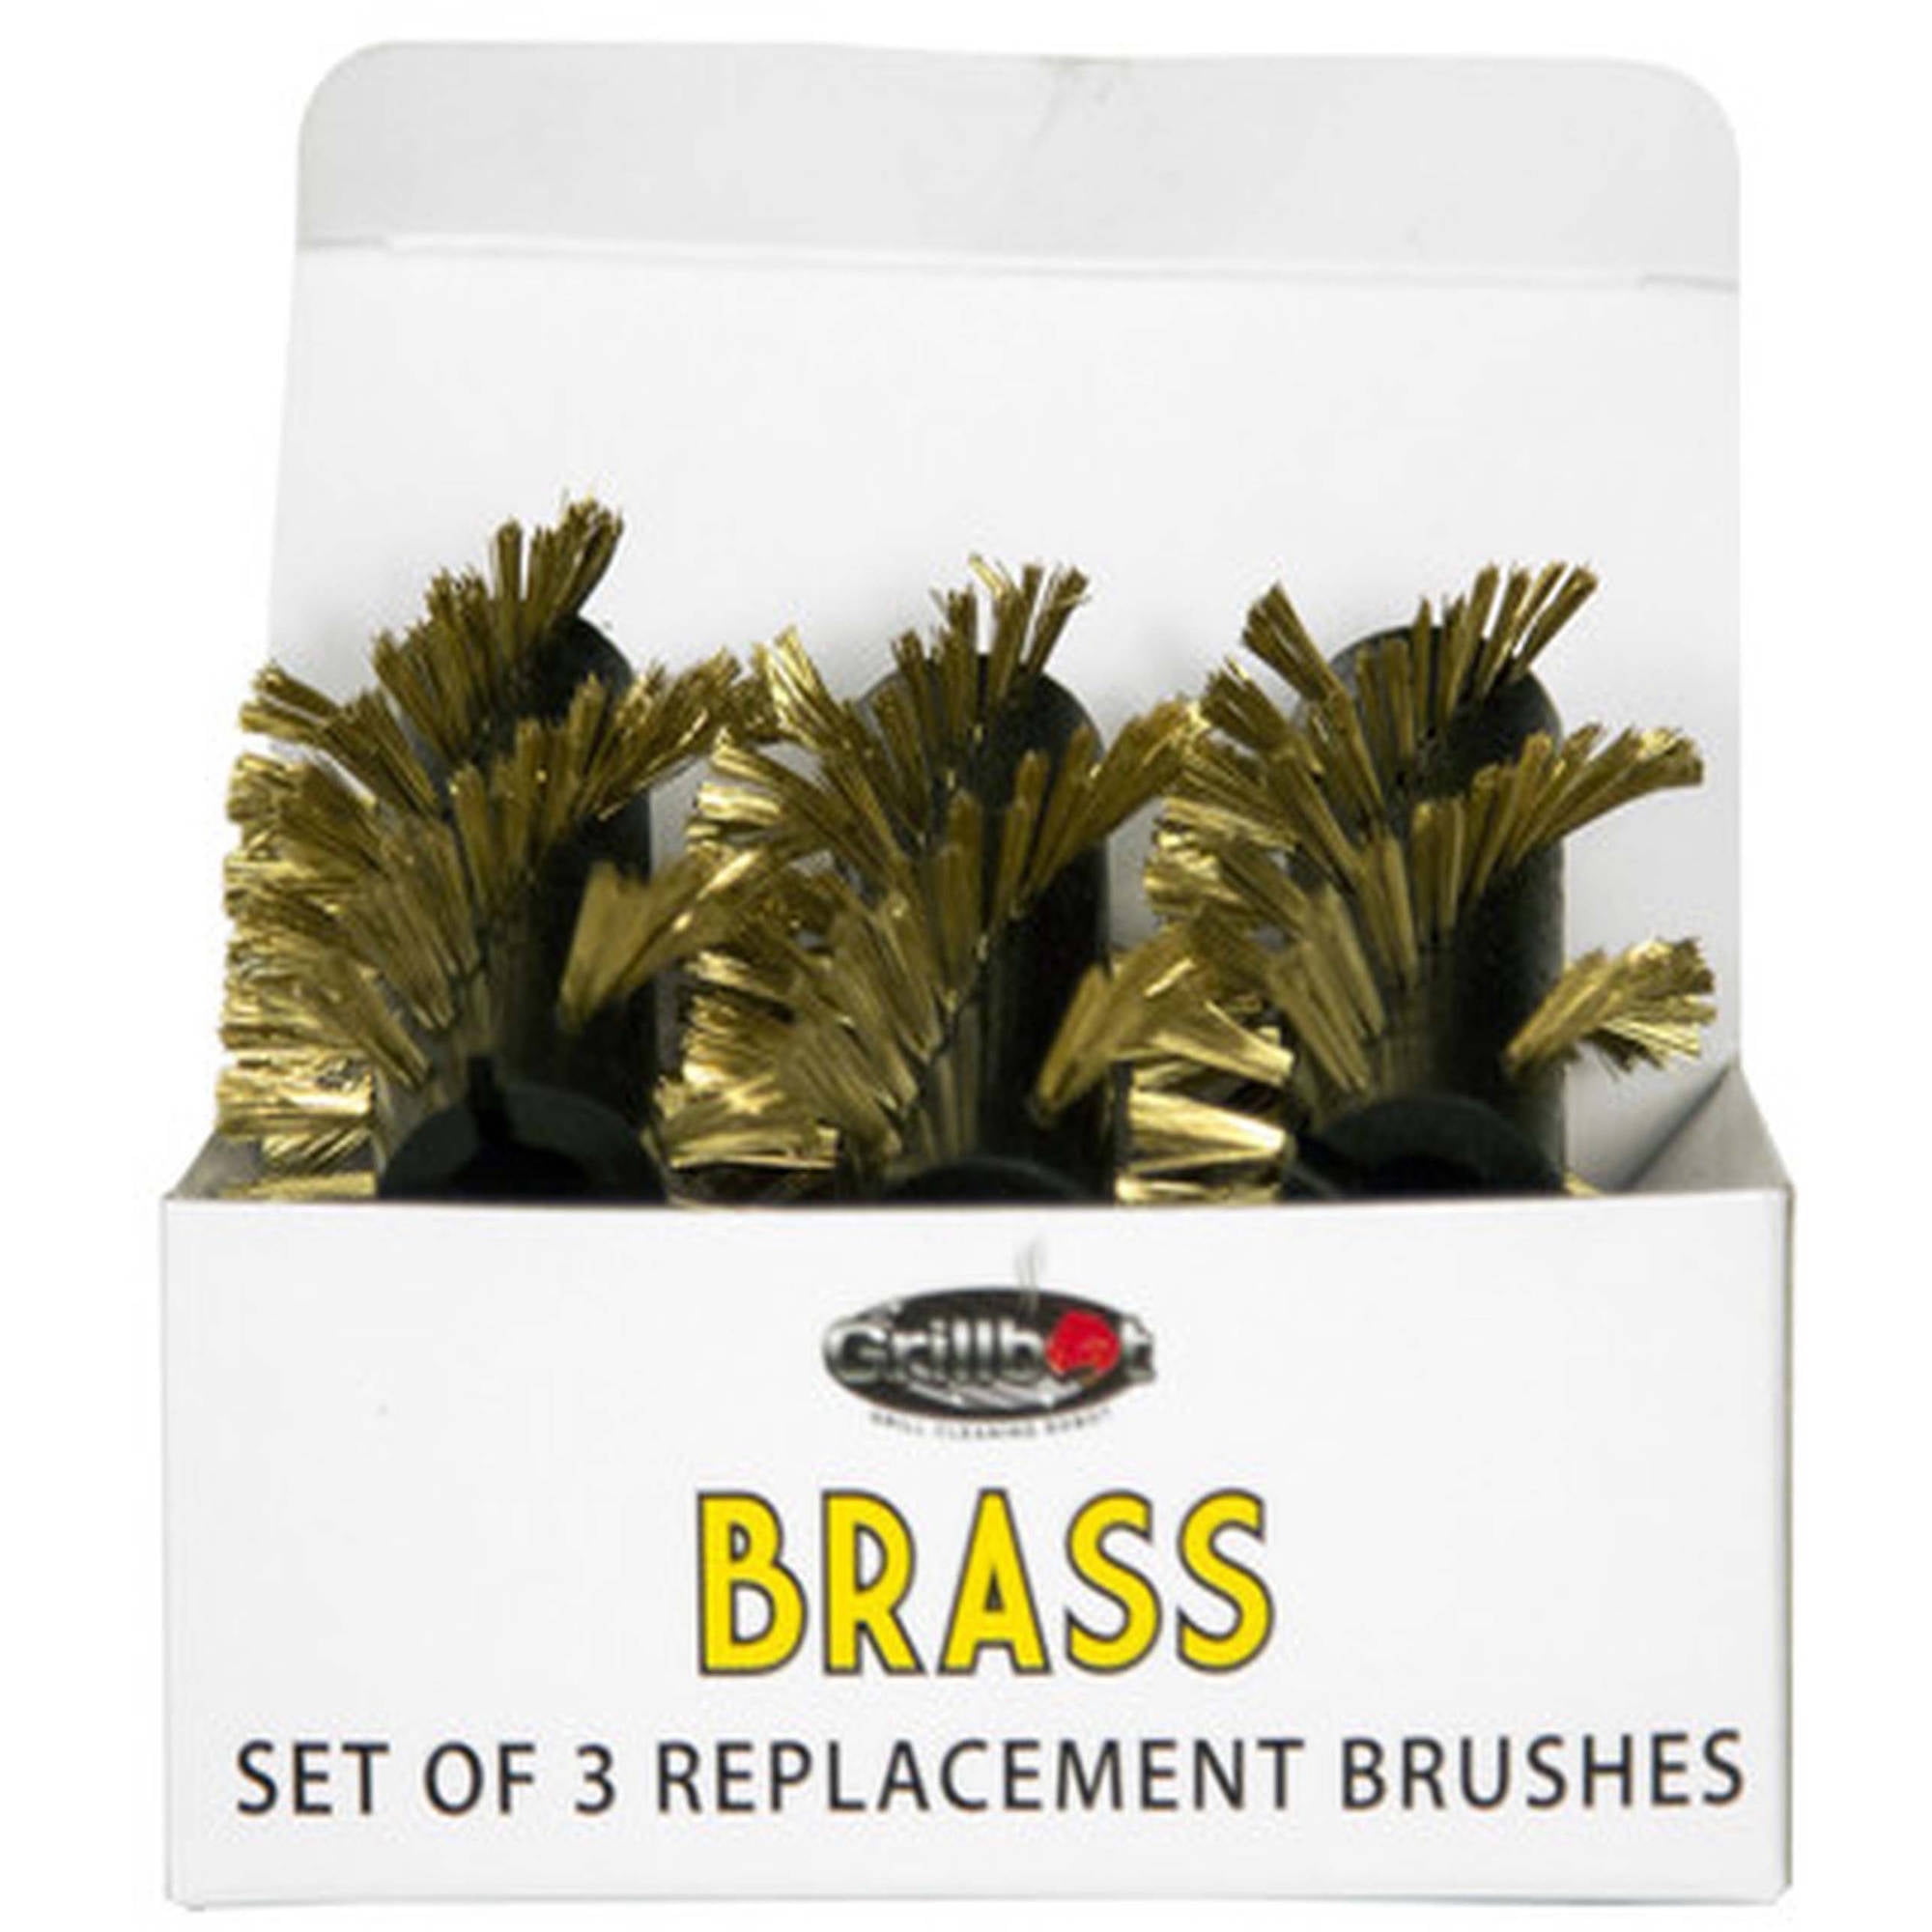 Grillbot GBB201 Replacement Brushes for Grill, Brass